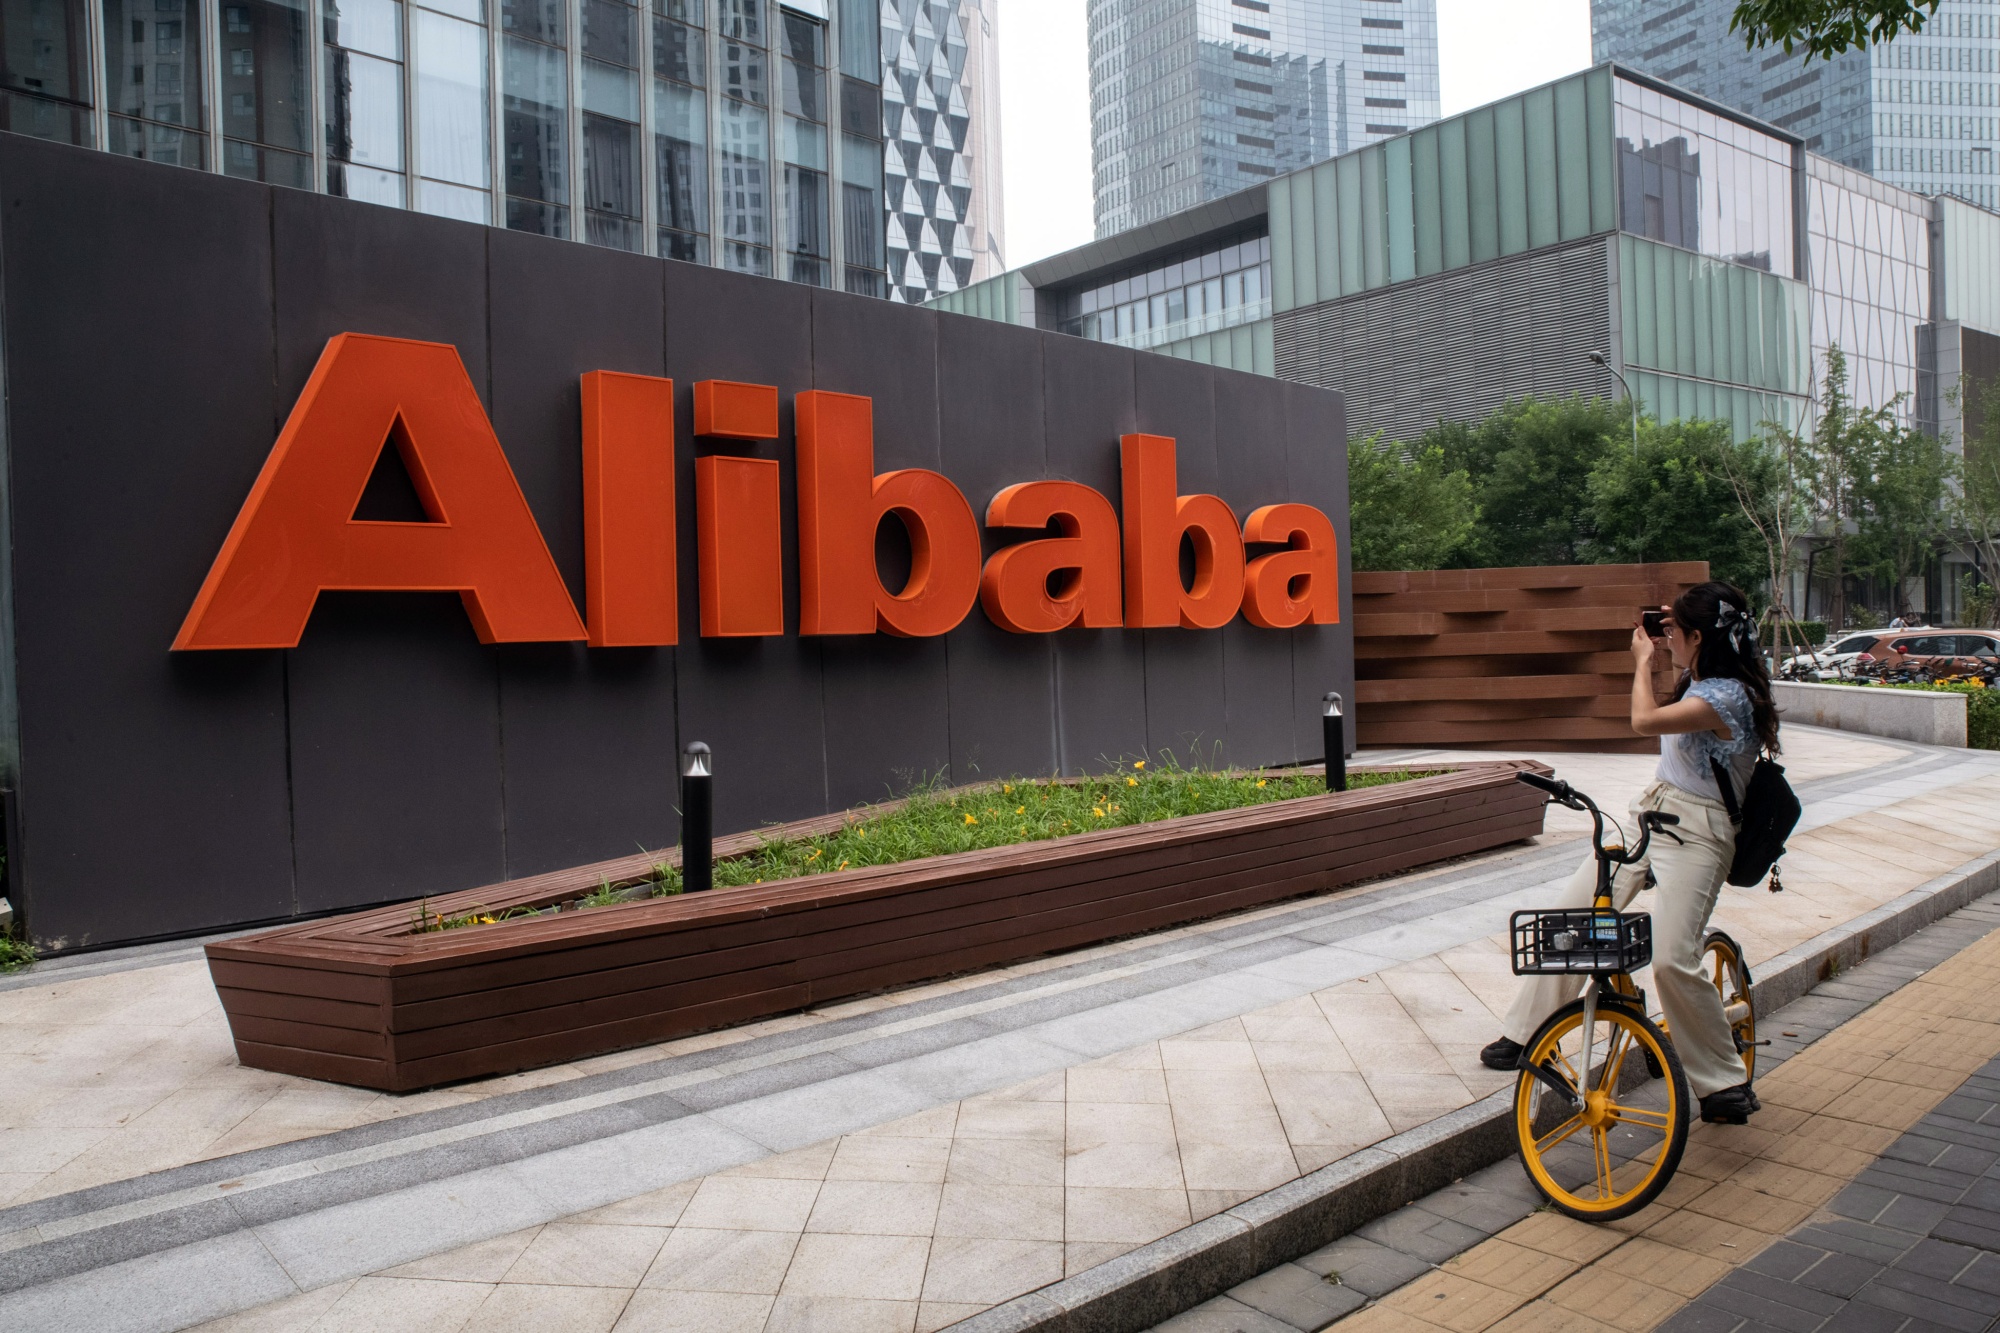 Alibaba Offices in Beijing ahead of Earnings Results